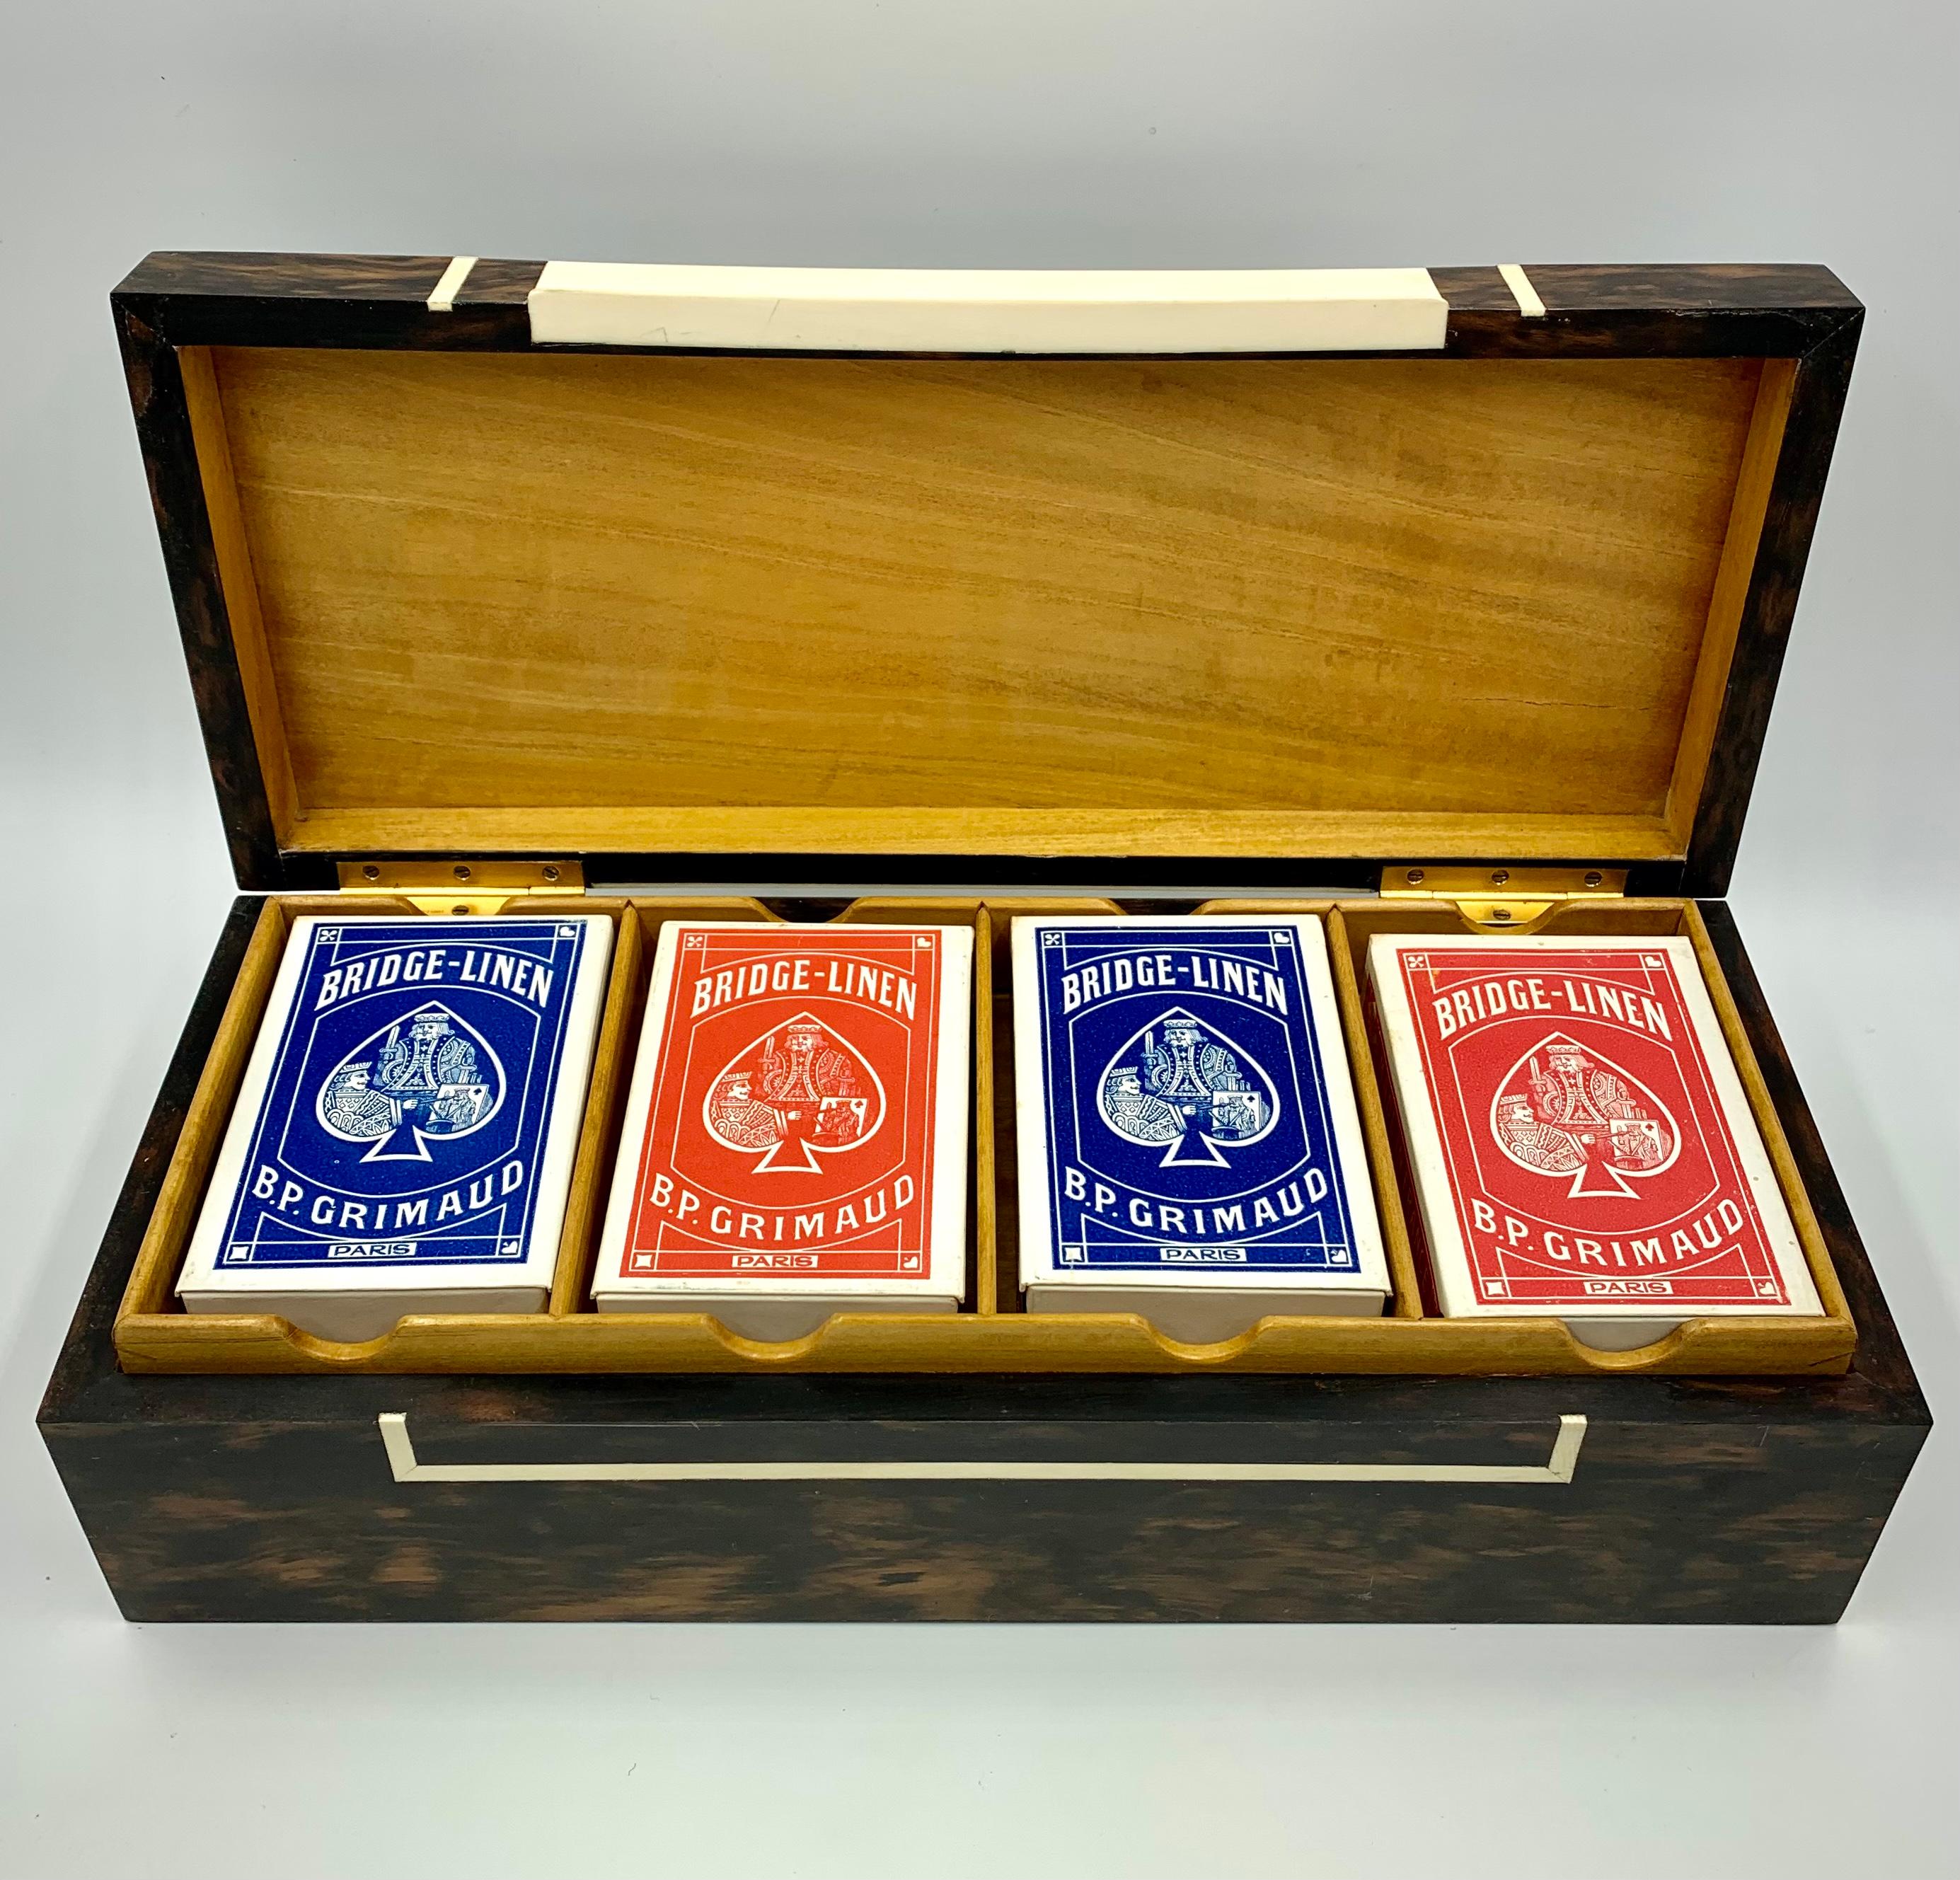 A fabulous vintage gaming box by London's esteemed luxury goods maker Dunhill. Signed Alfred Dunhill Paris fab. Anglaise, this exotic wood game box is fitted with a removable tray for four decks of cards with a bottom compartment for scoring